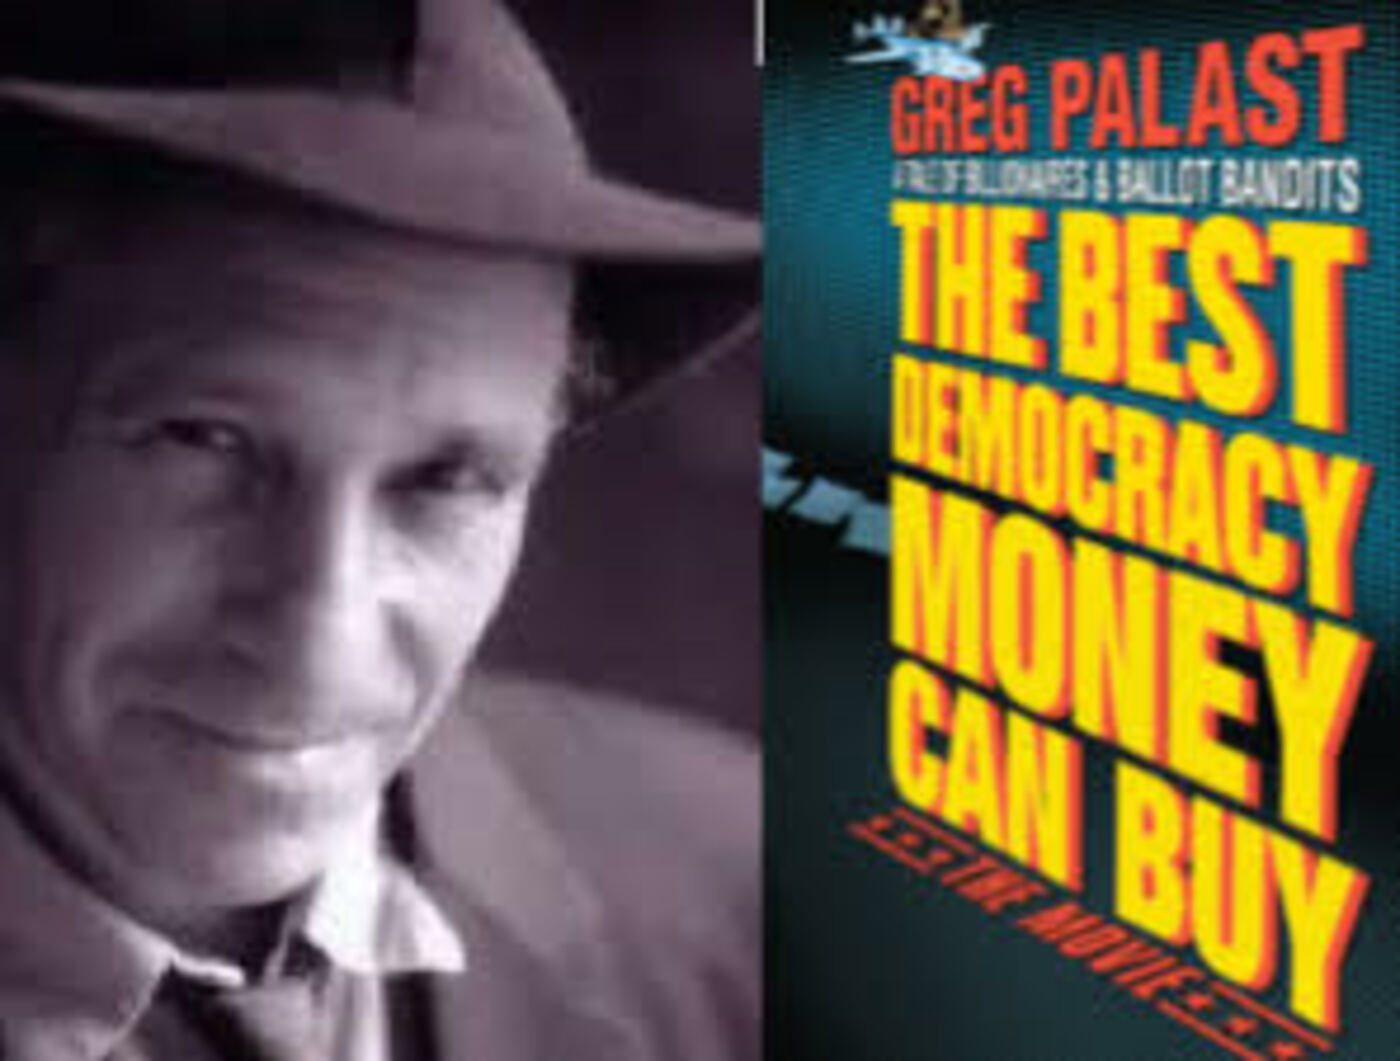 NEW - GREG PALAST on dirty tricks and voter suppression in the midterms